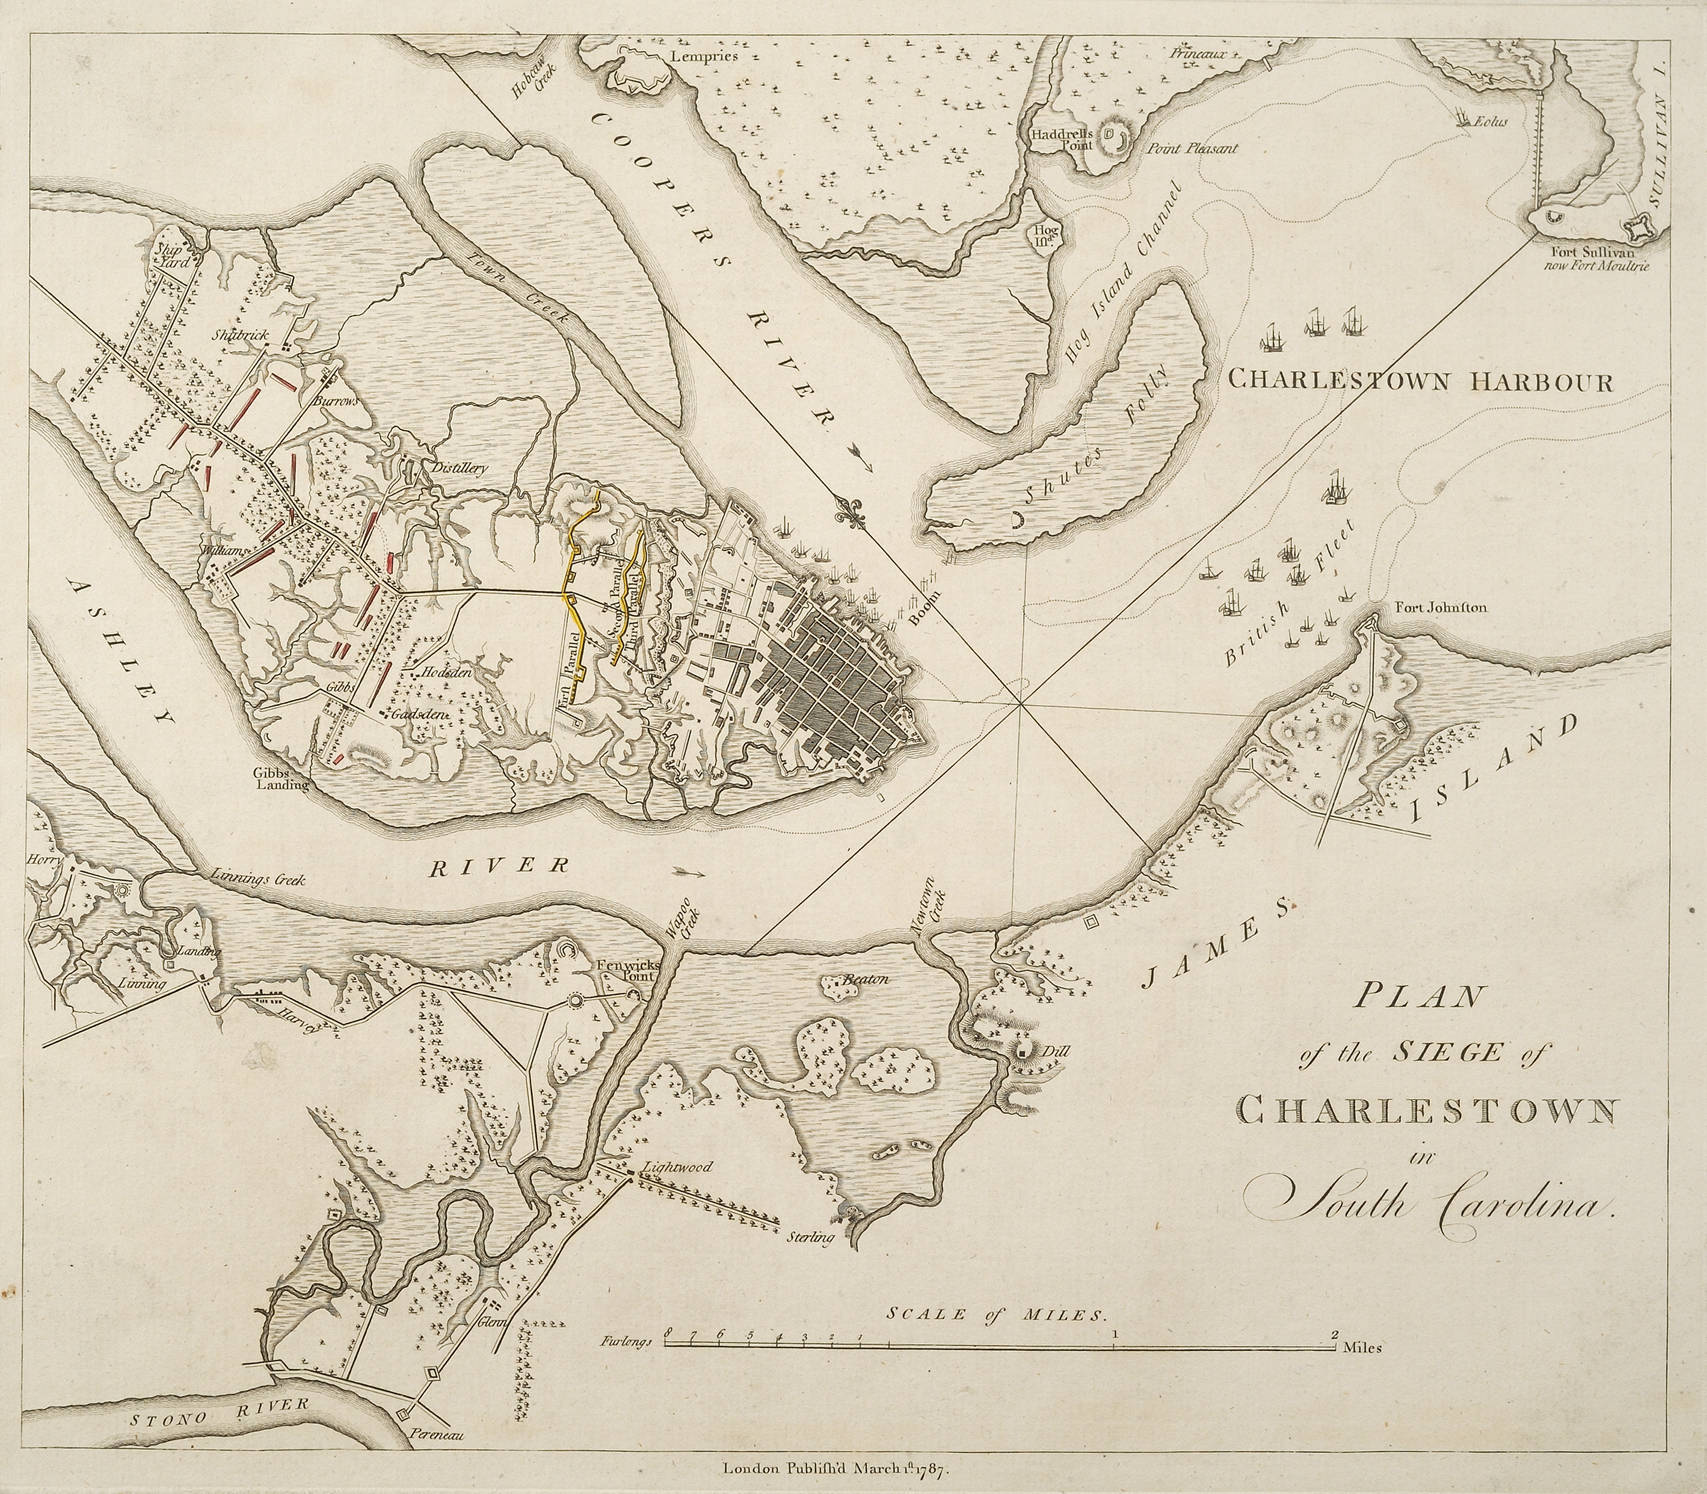 Plan of the siege of Charleston, in South Carolina by William Faden, 1787